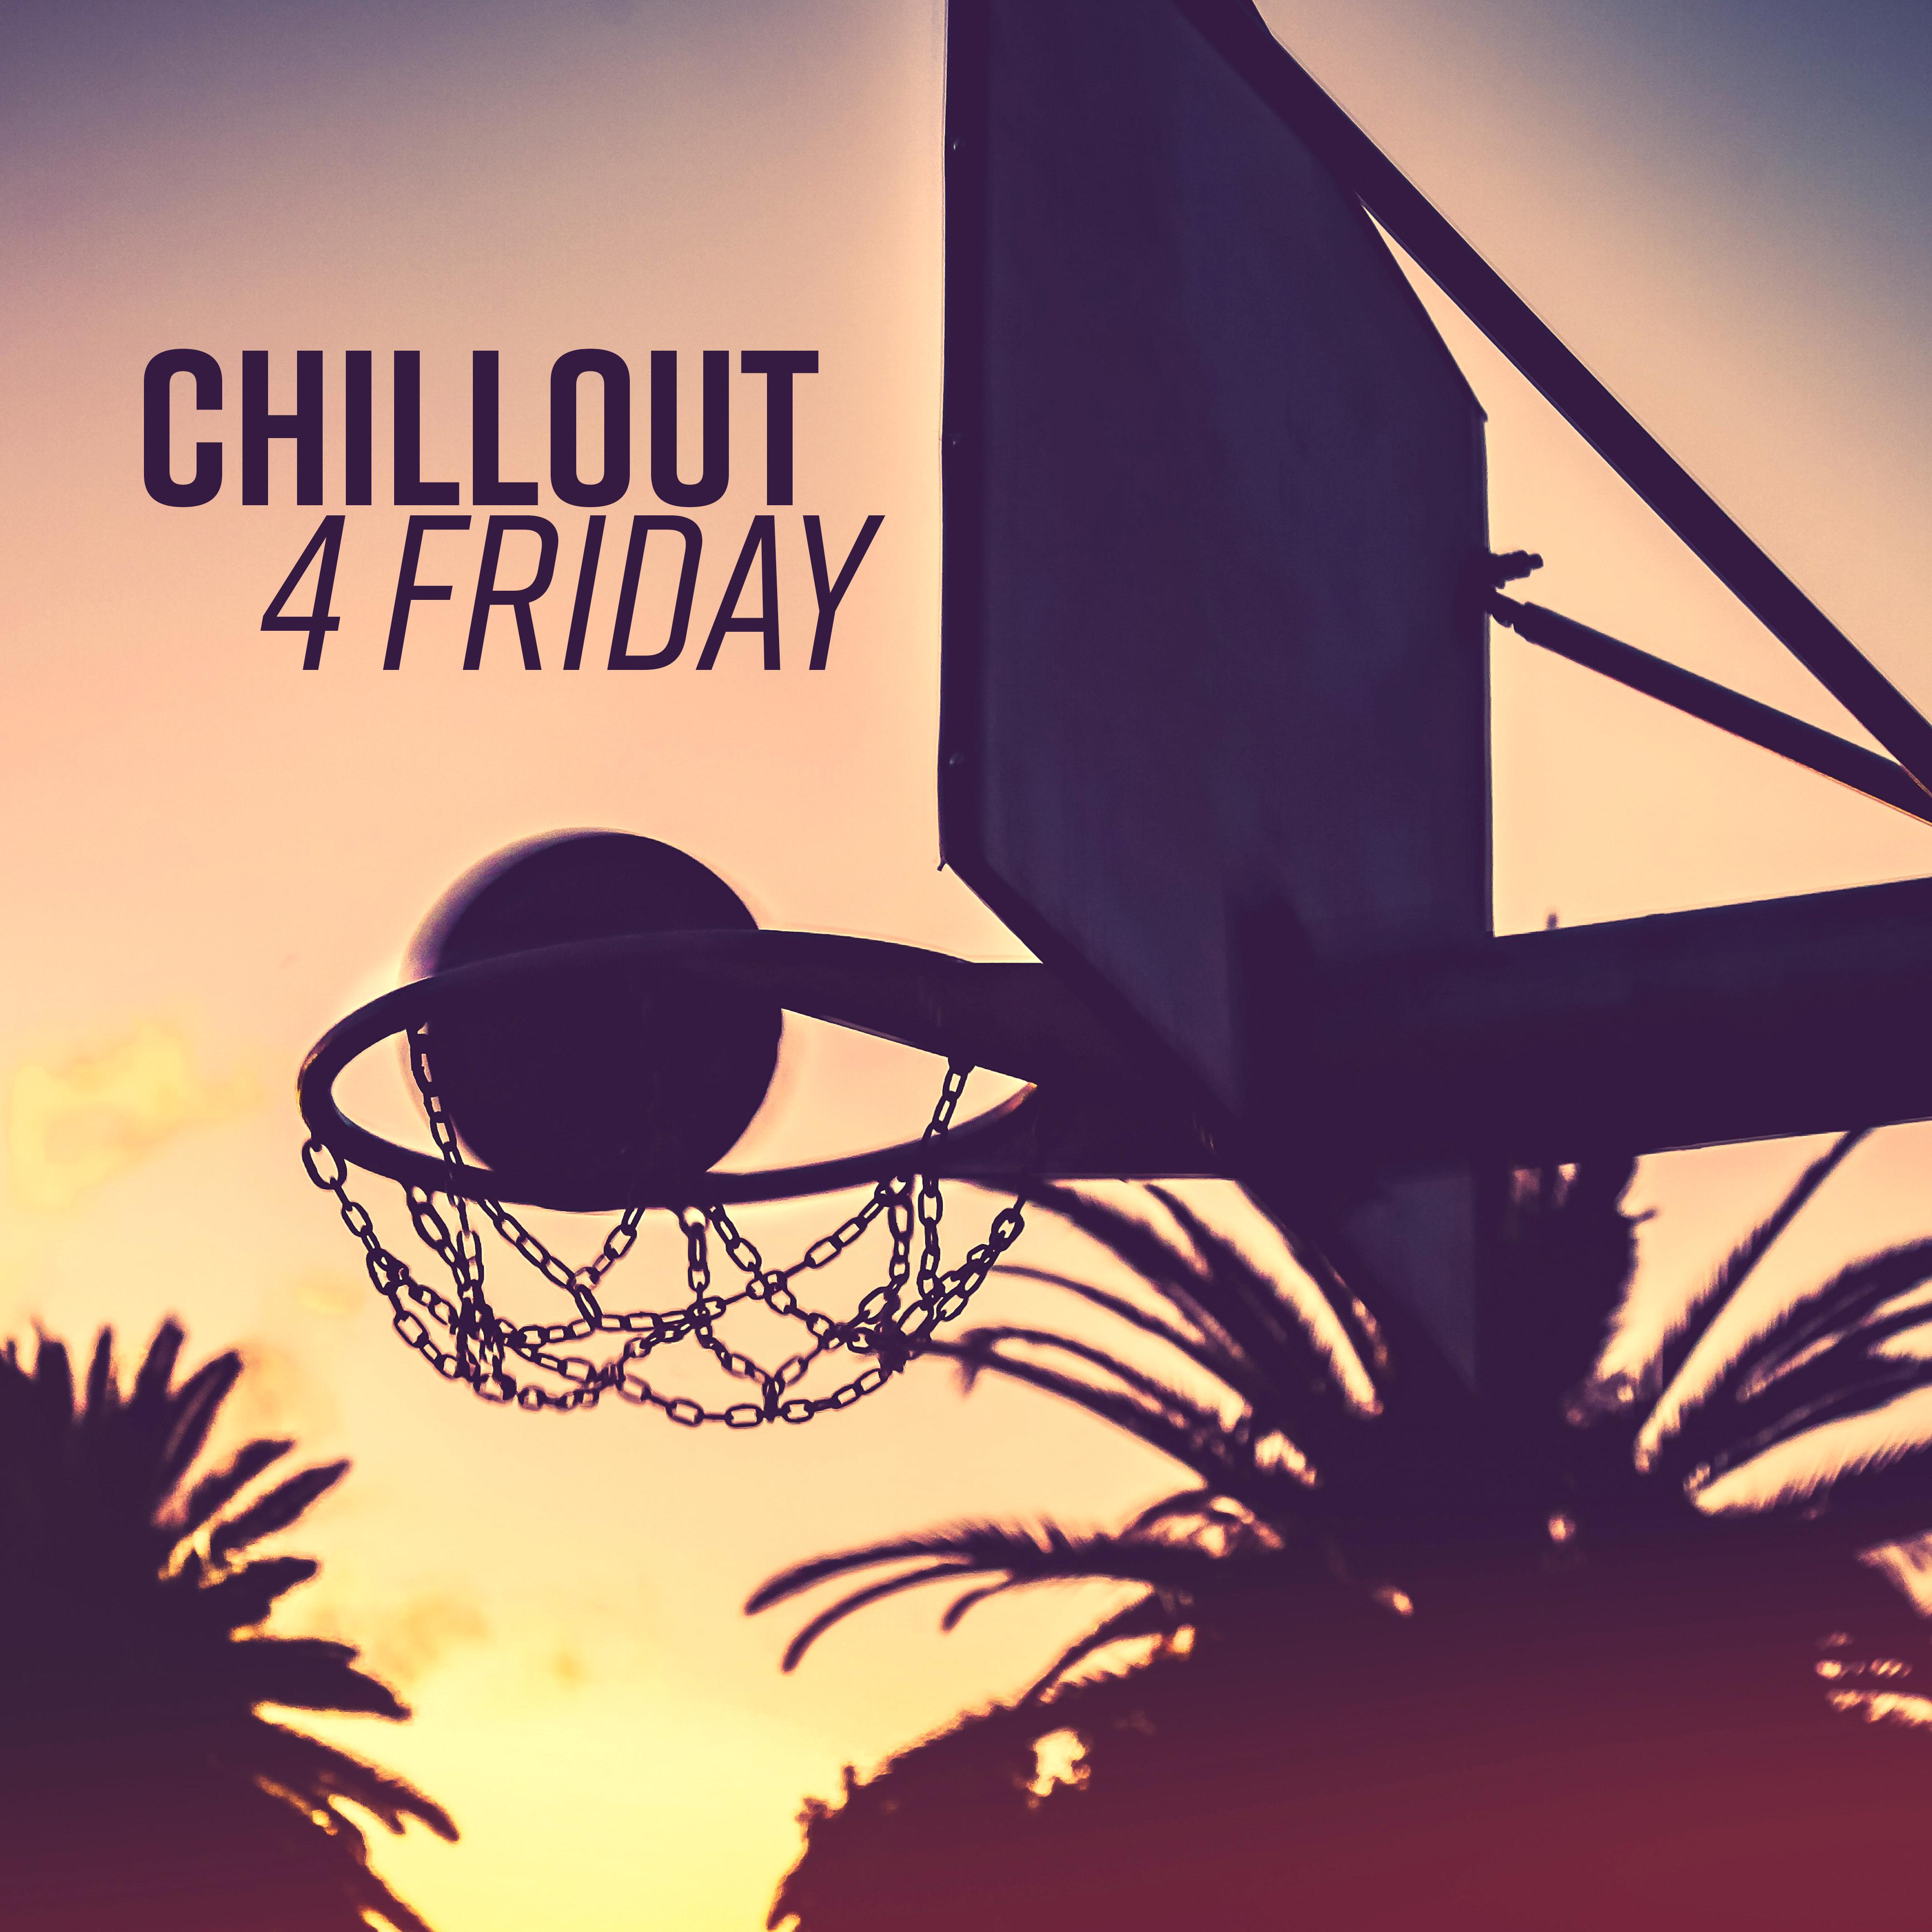 Chillout 4 Friday